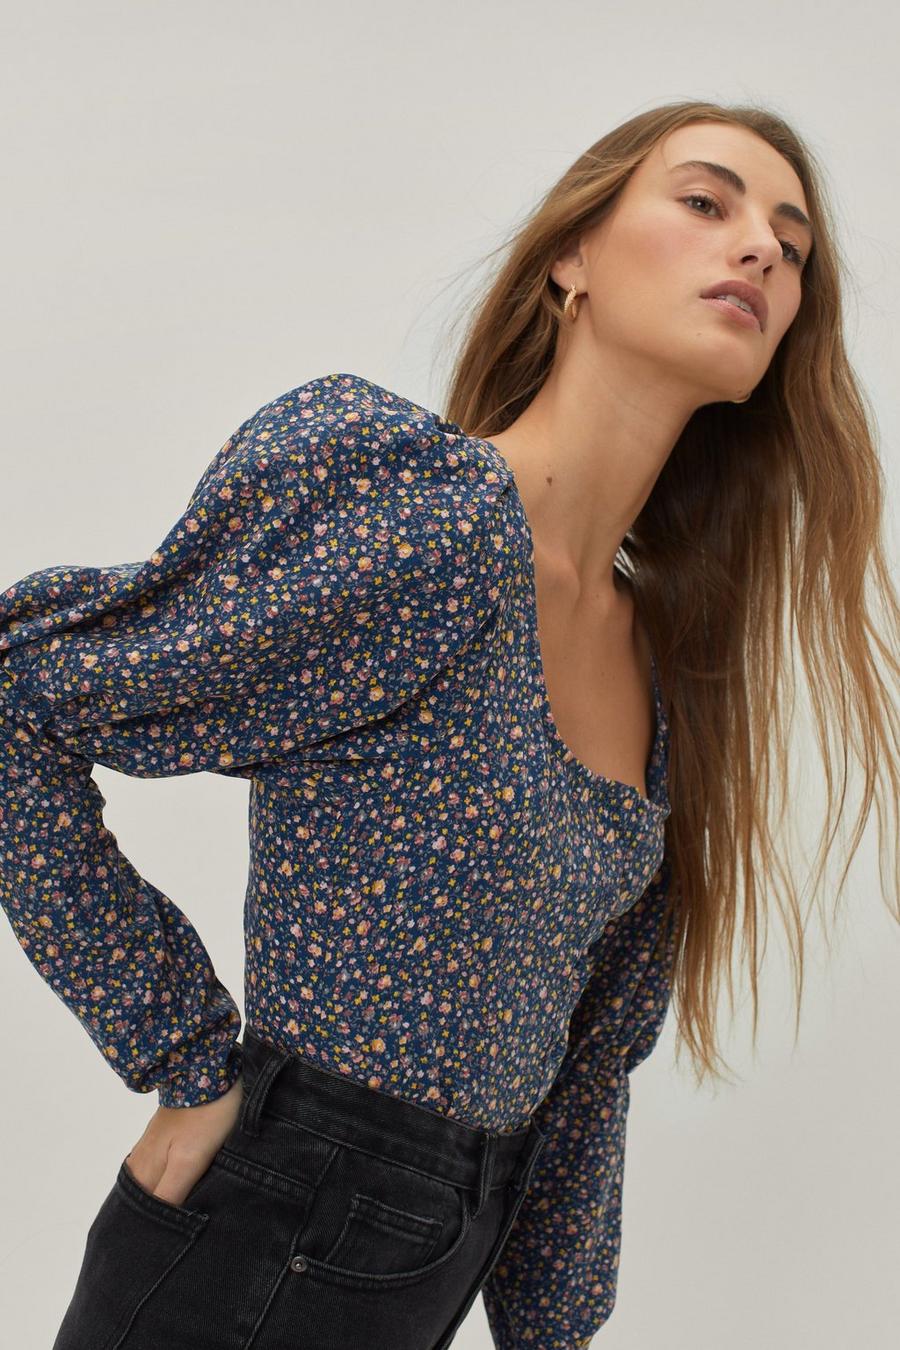 Puff Sleeve Tops | Puff Shoulder Tops and Blouses | Nasty Gal